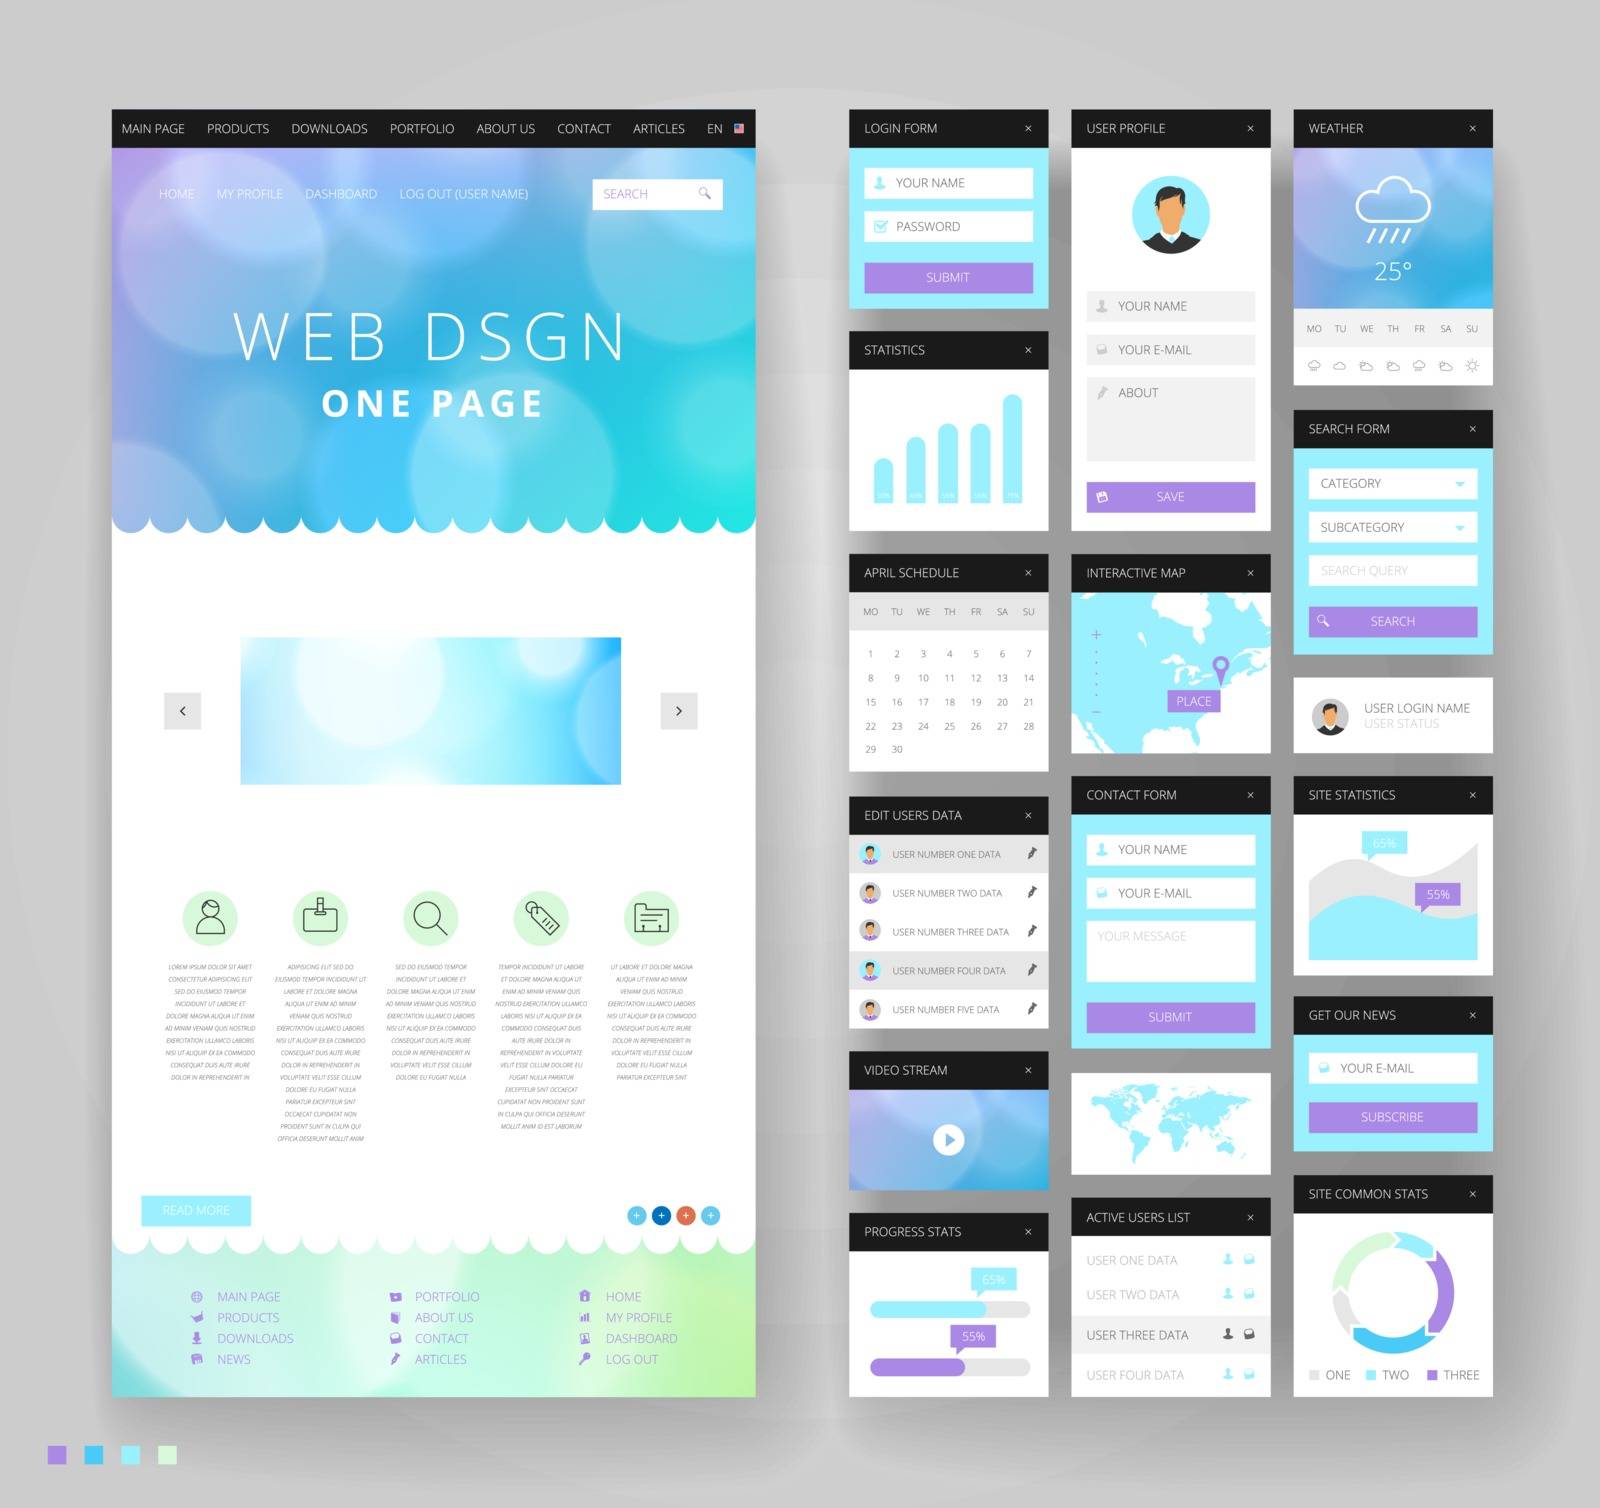 Website template design with interface elements by ildogesto